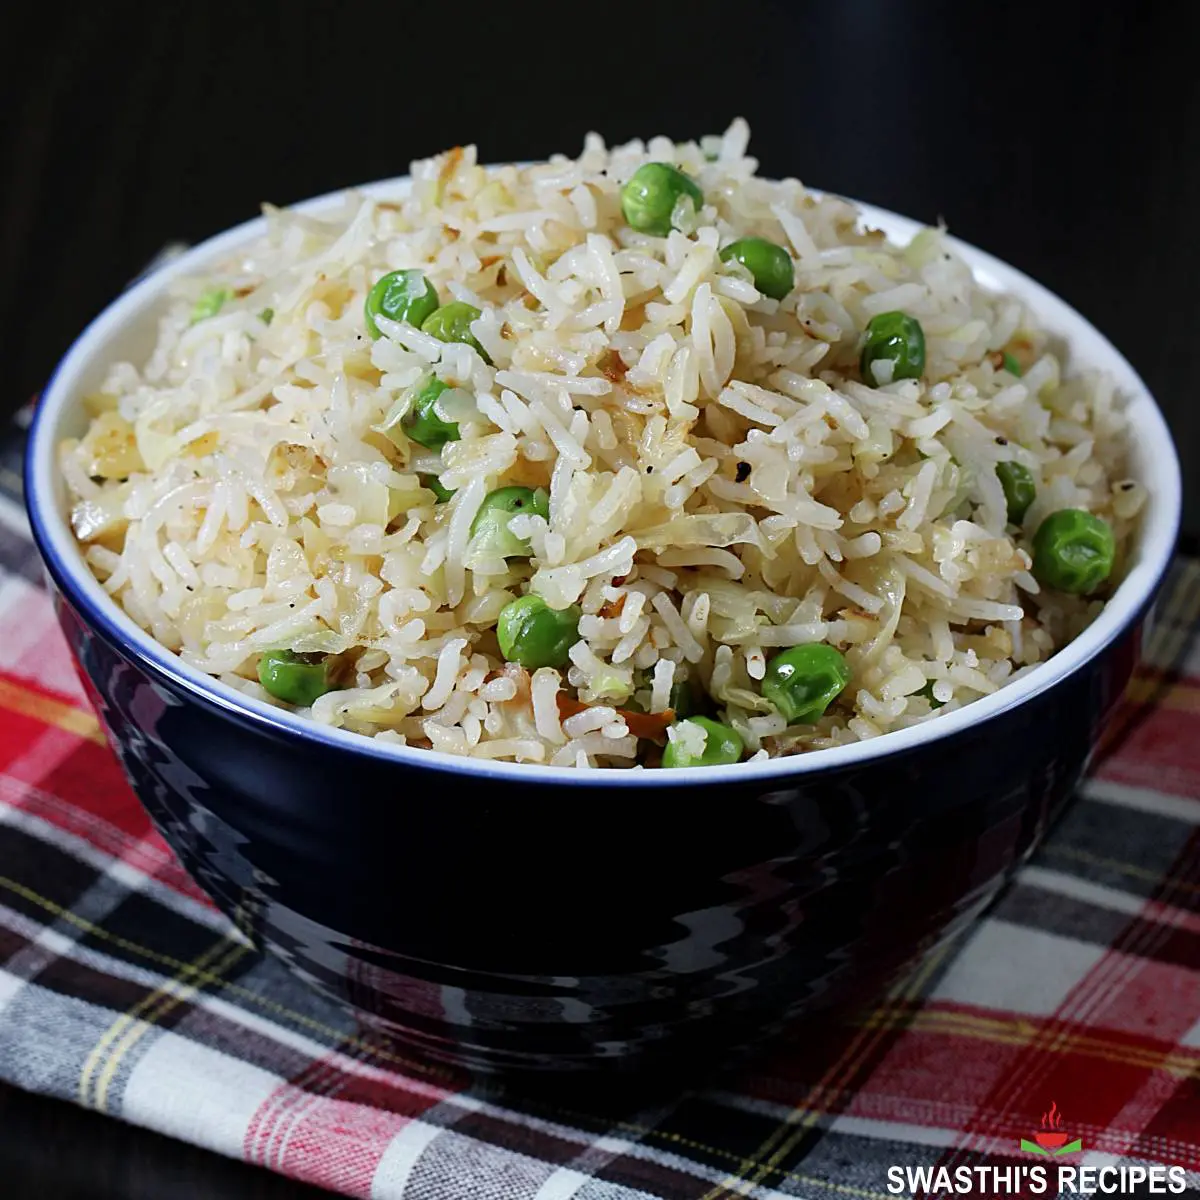 Cabbage rice made with basmati rice, garlic and cabbage